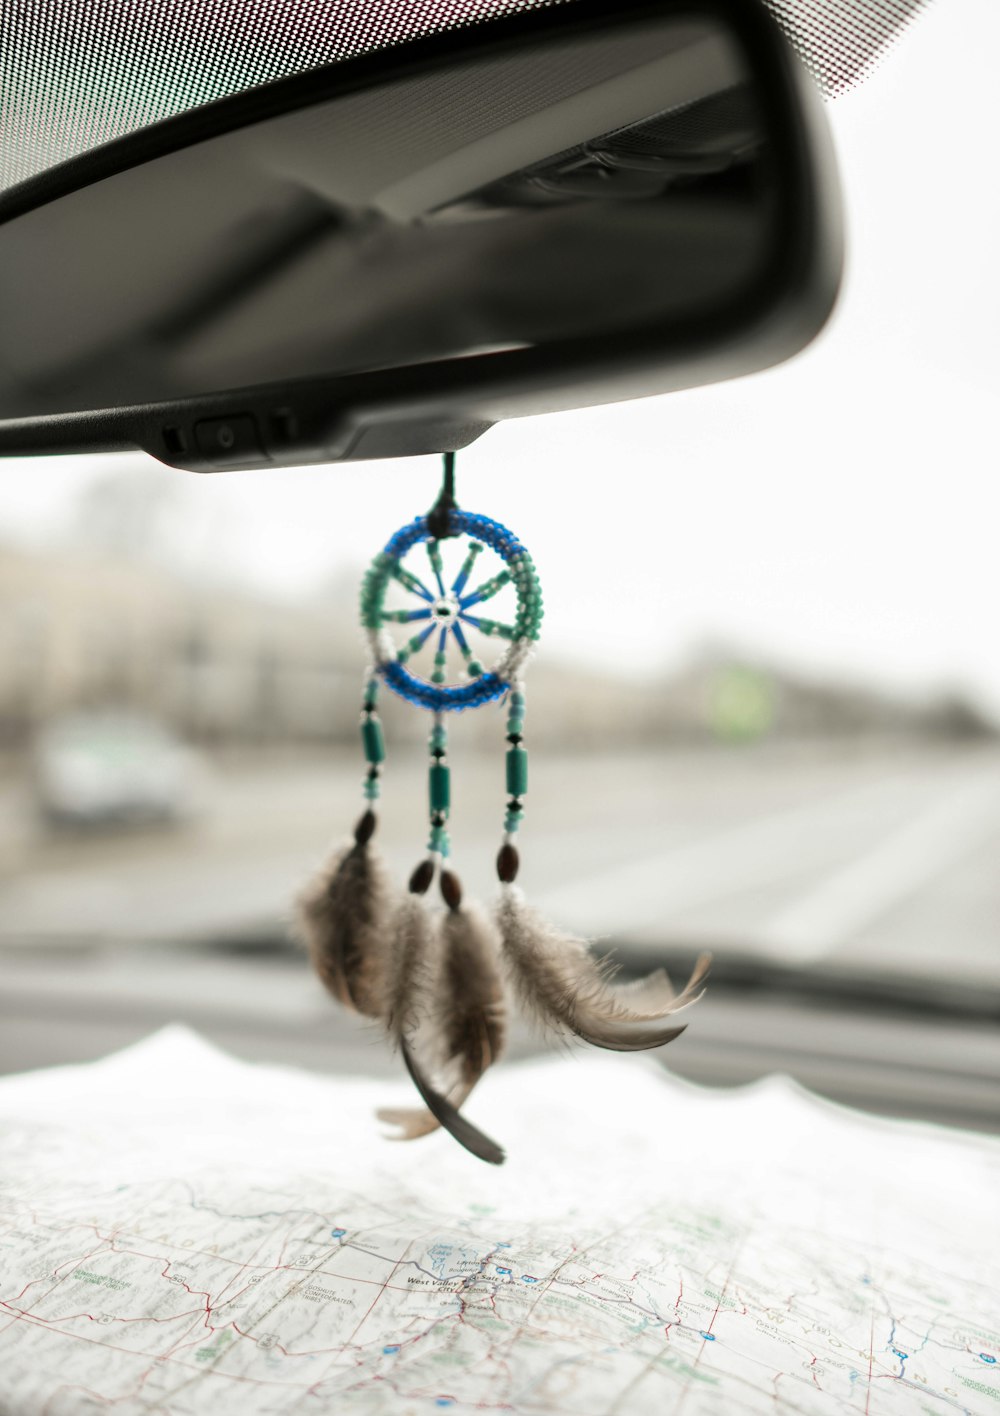 blue and green dream catcher hanging on black vehicle rear view mirror